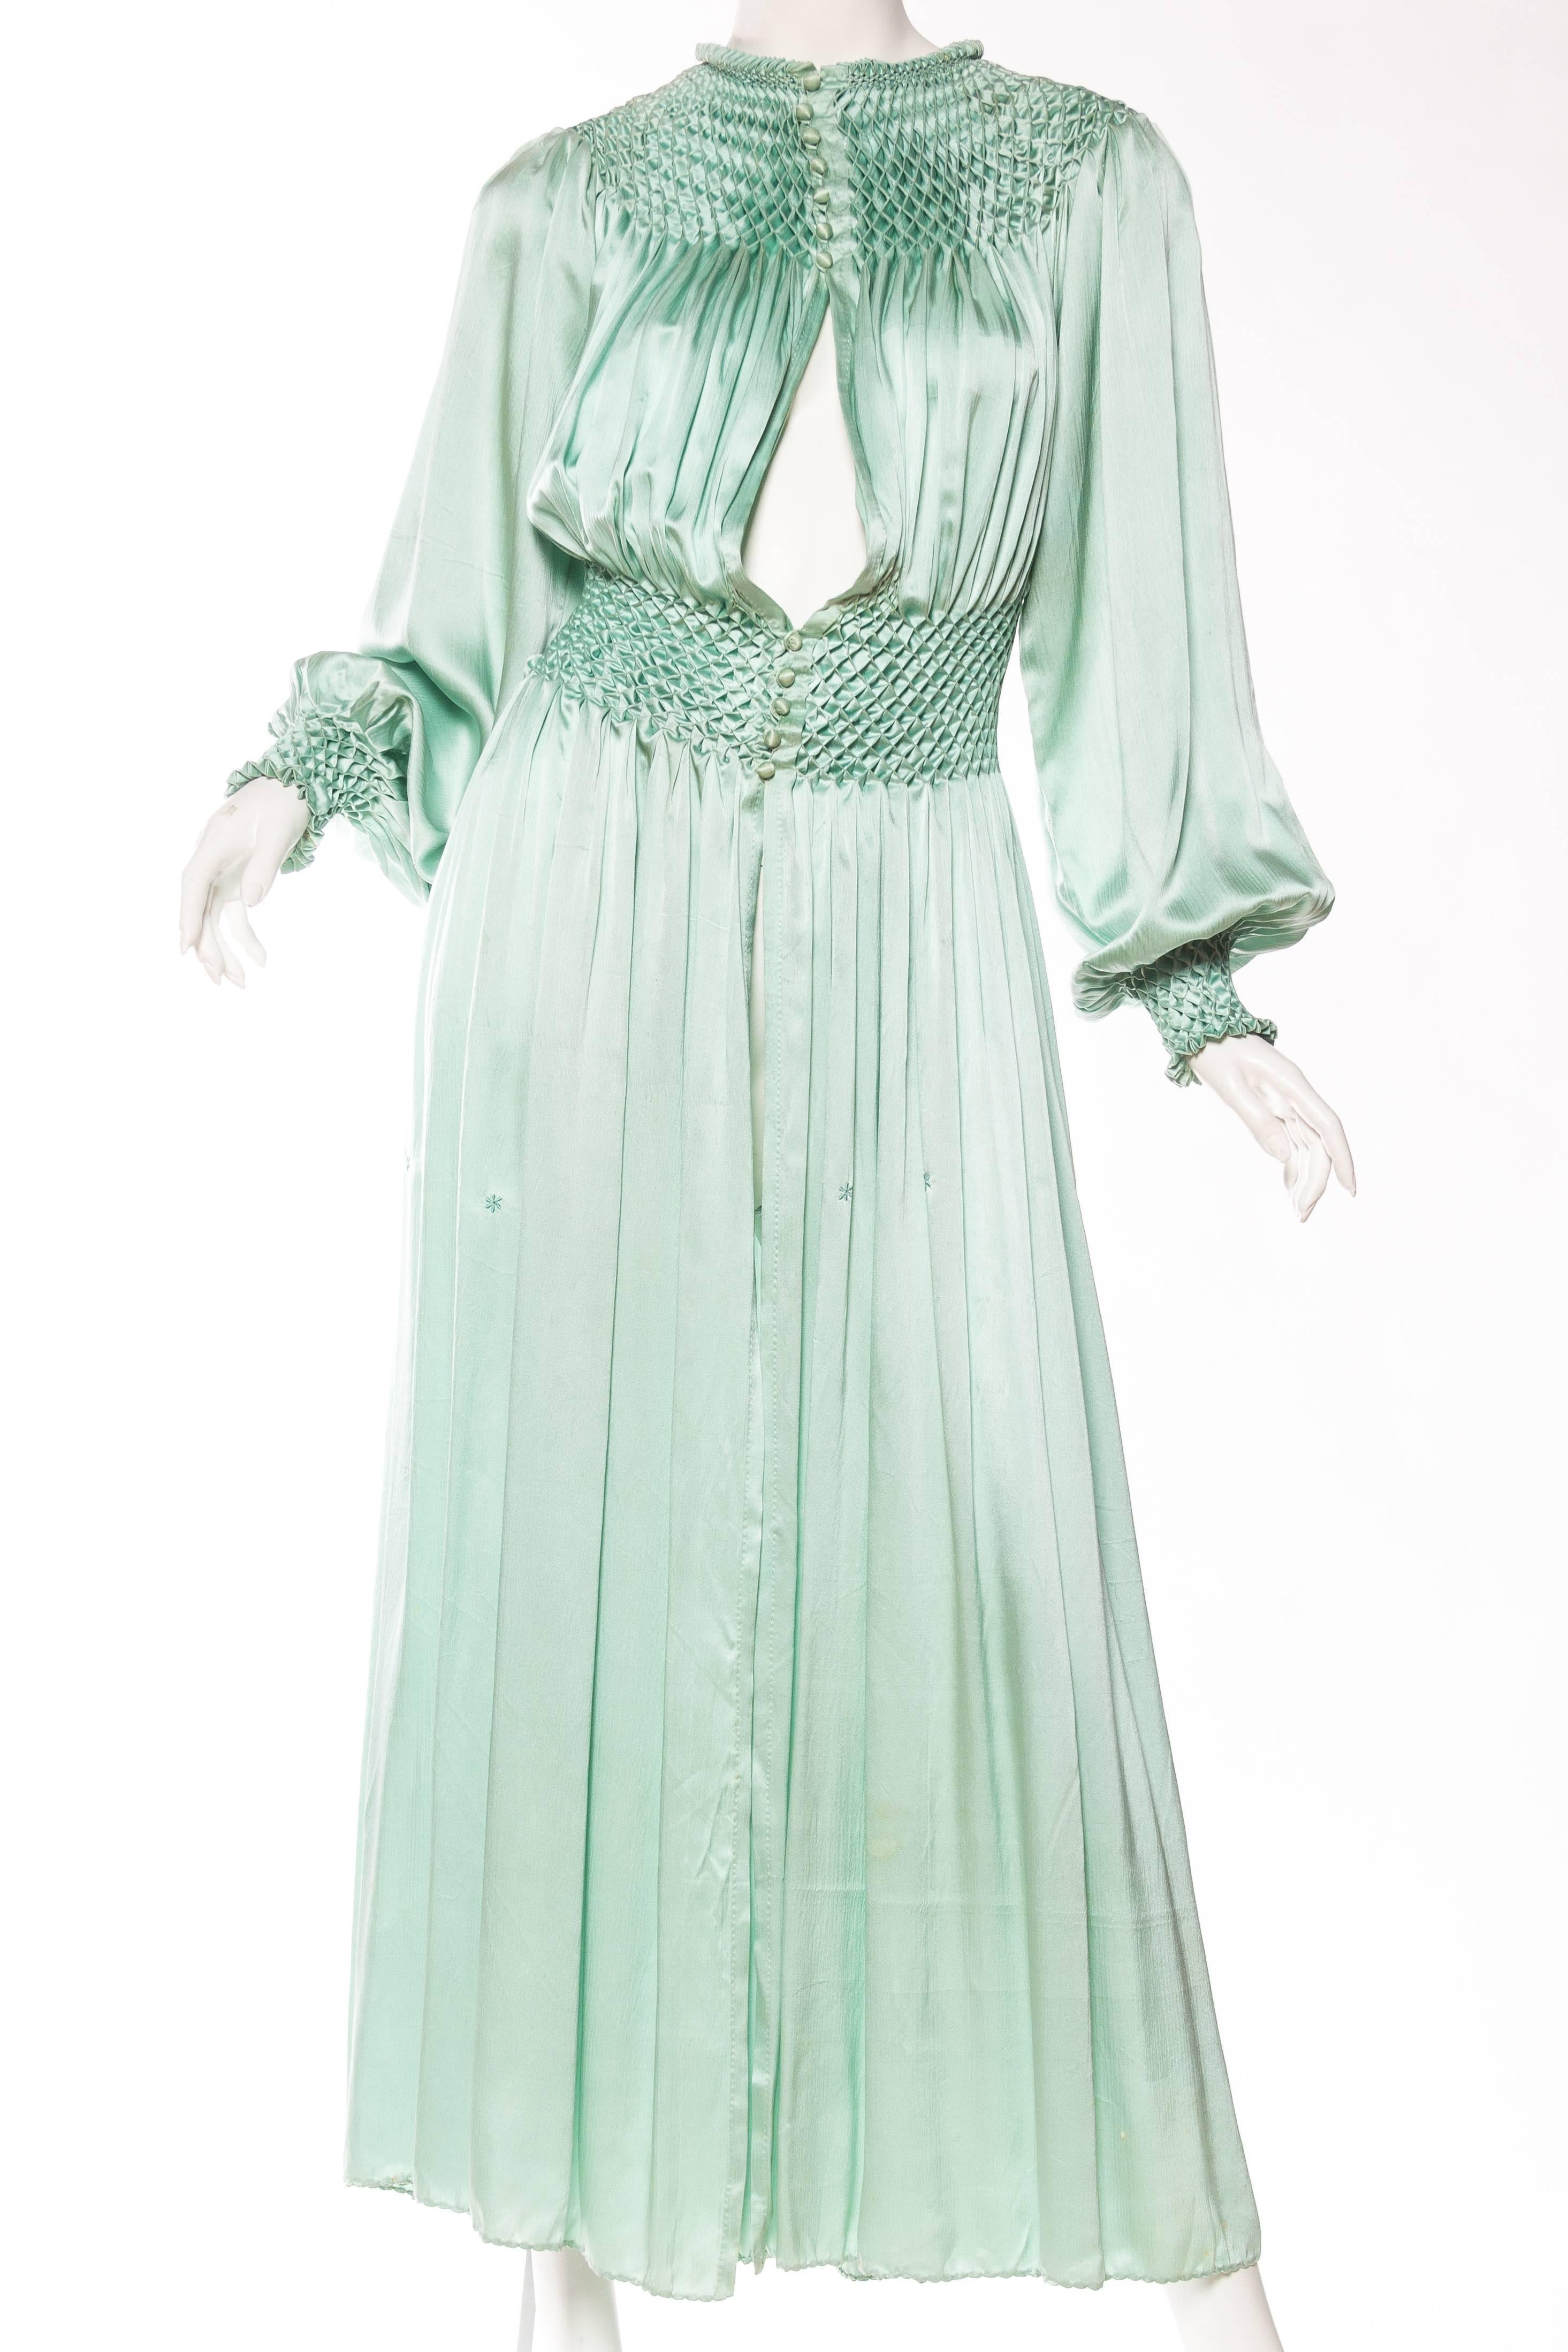 1940s dressing gown